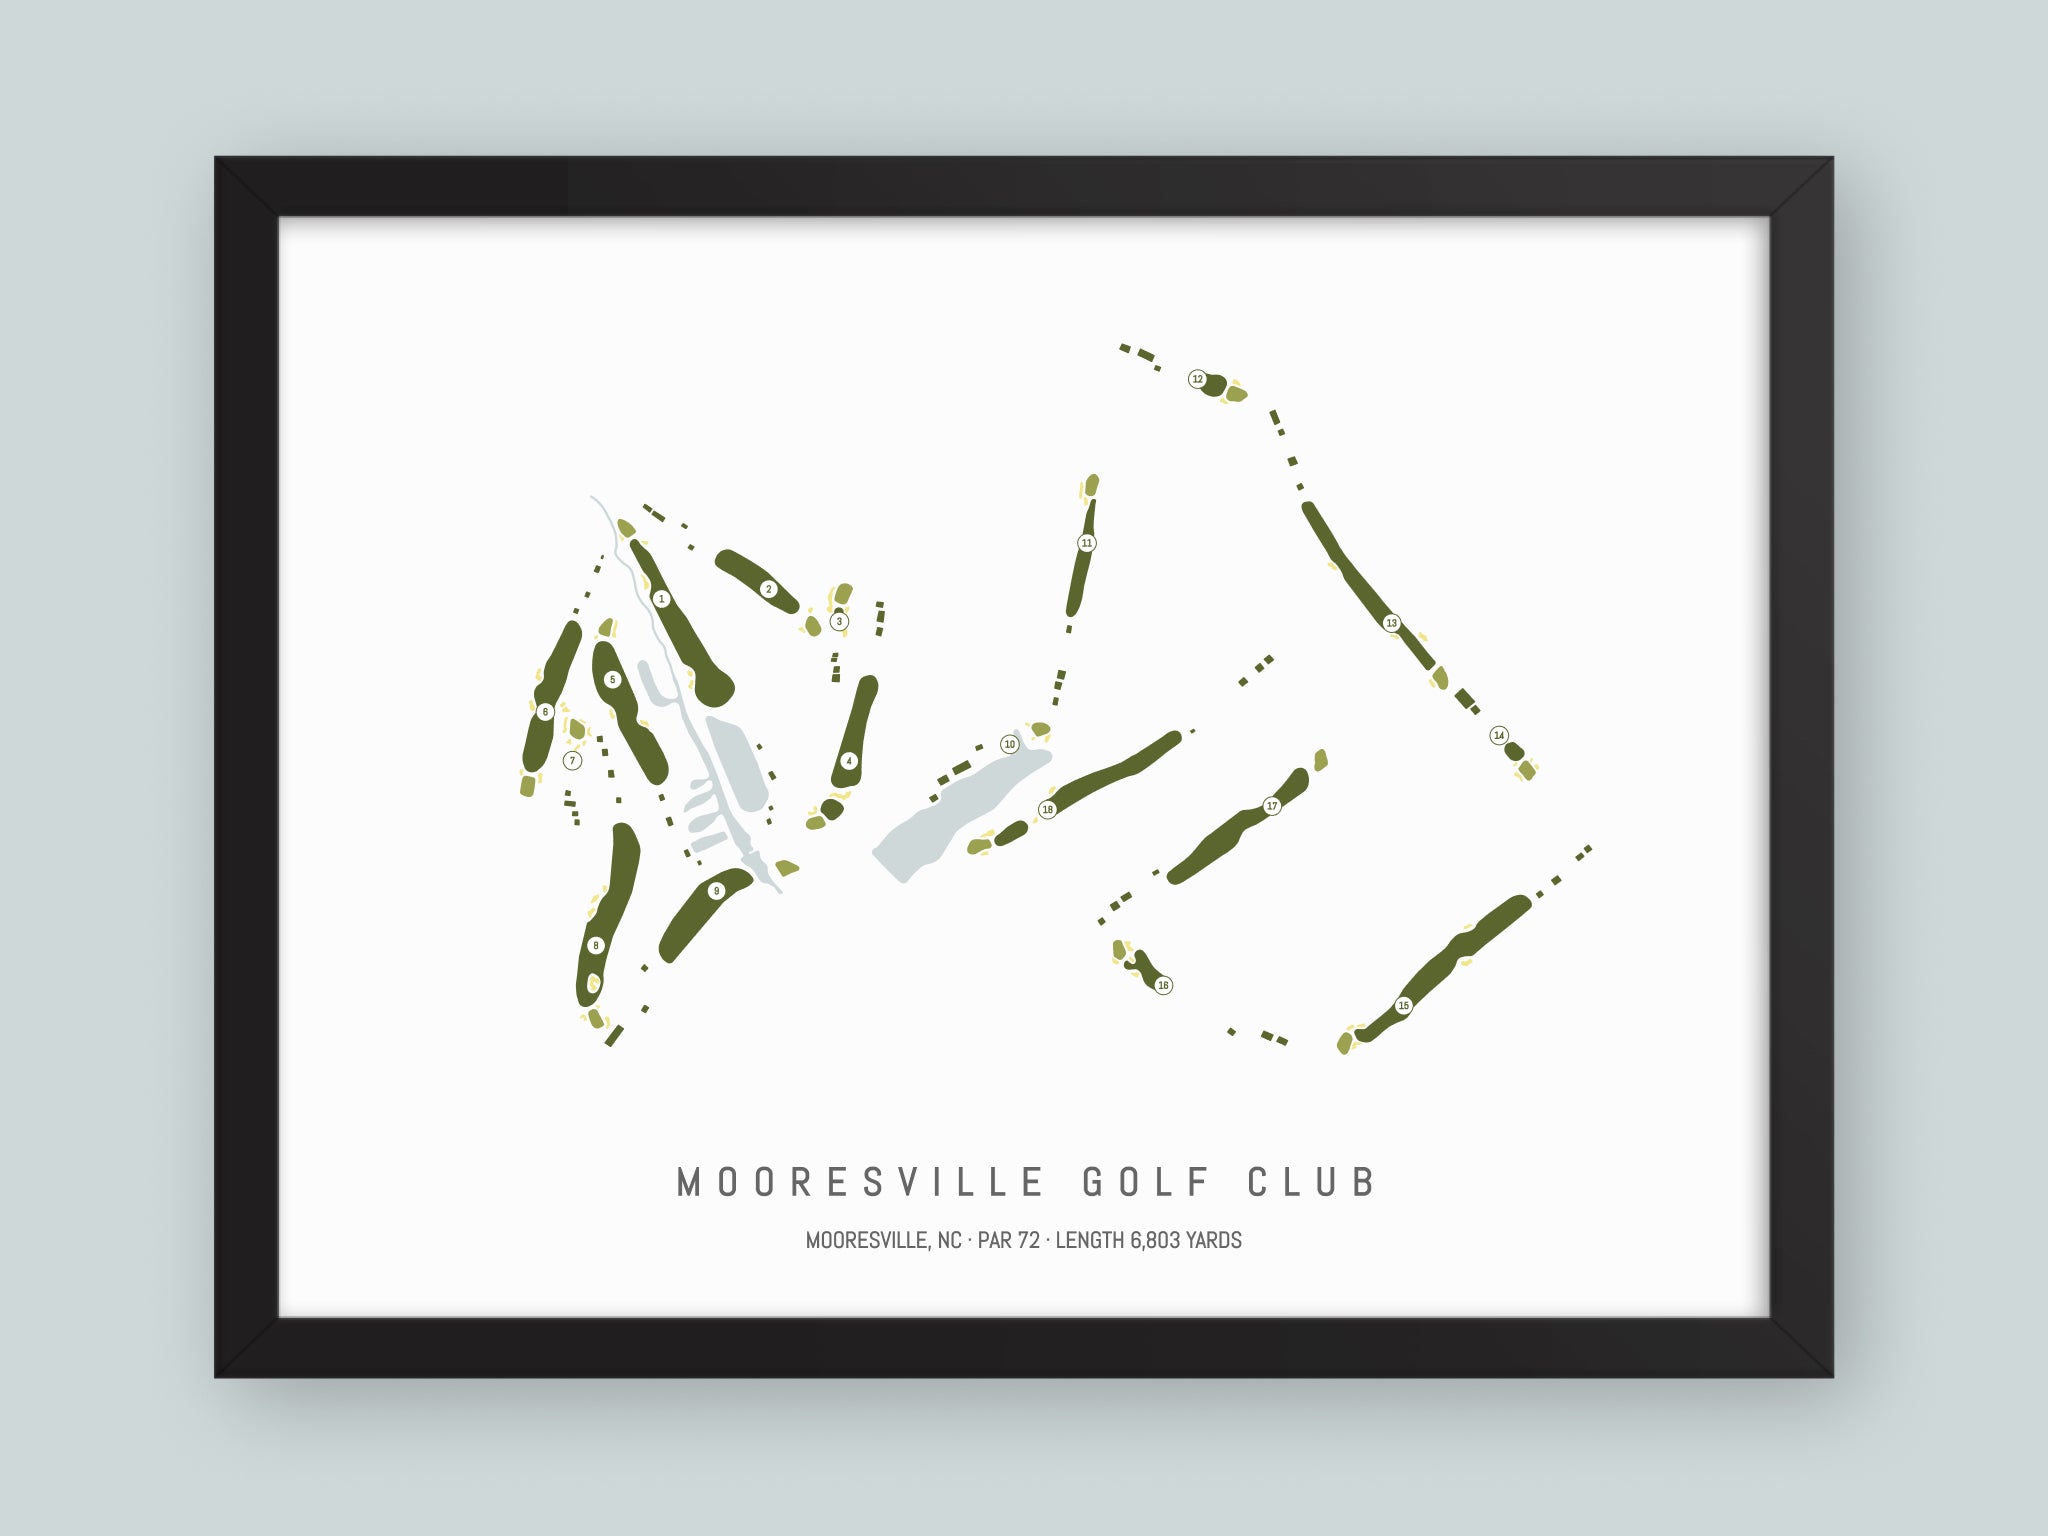 Mooresville-Golf-Club-NC--Black-Frame-24x18-With-Hole-Numbers